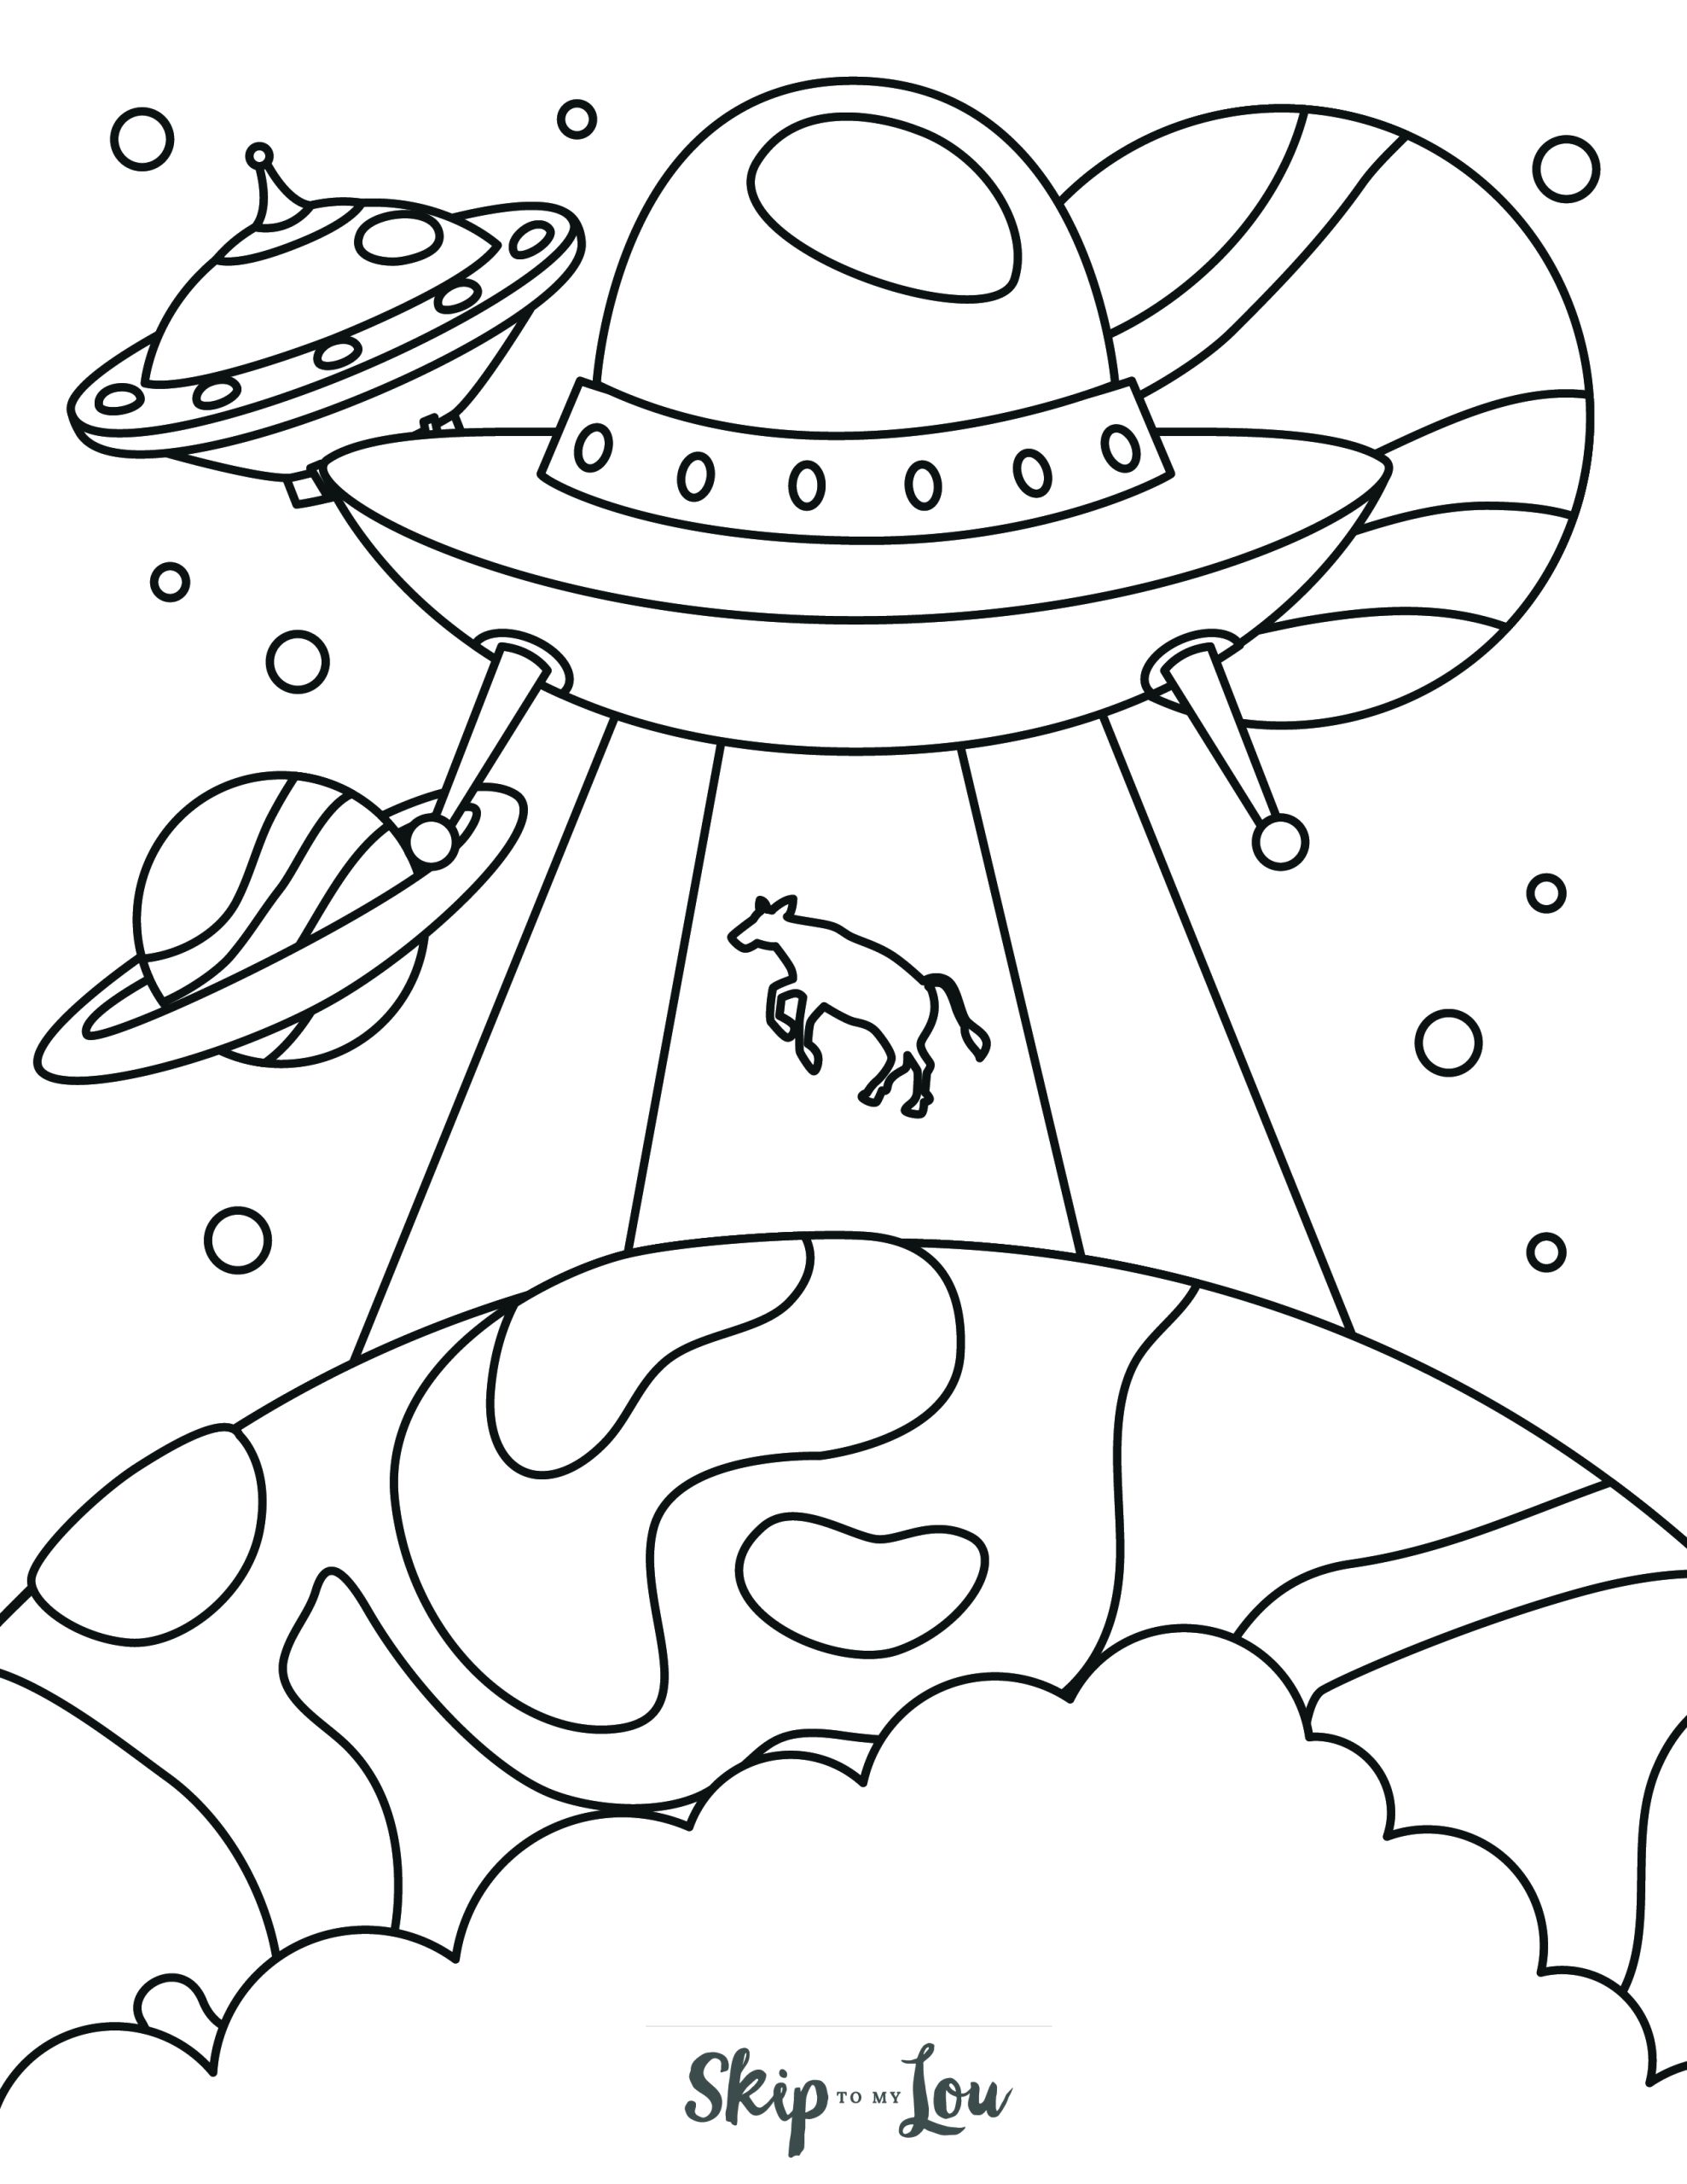 Space Coloring Page 12 - Large UFO spaceship with tractor beam lifting cow up from planet